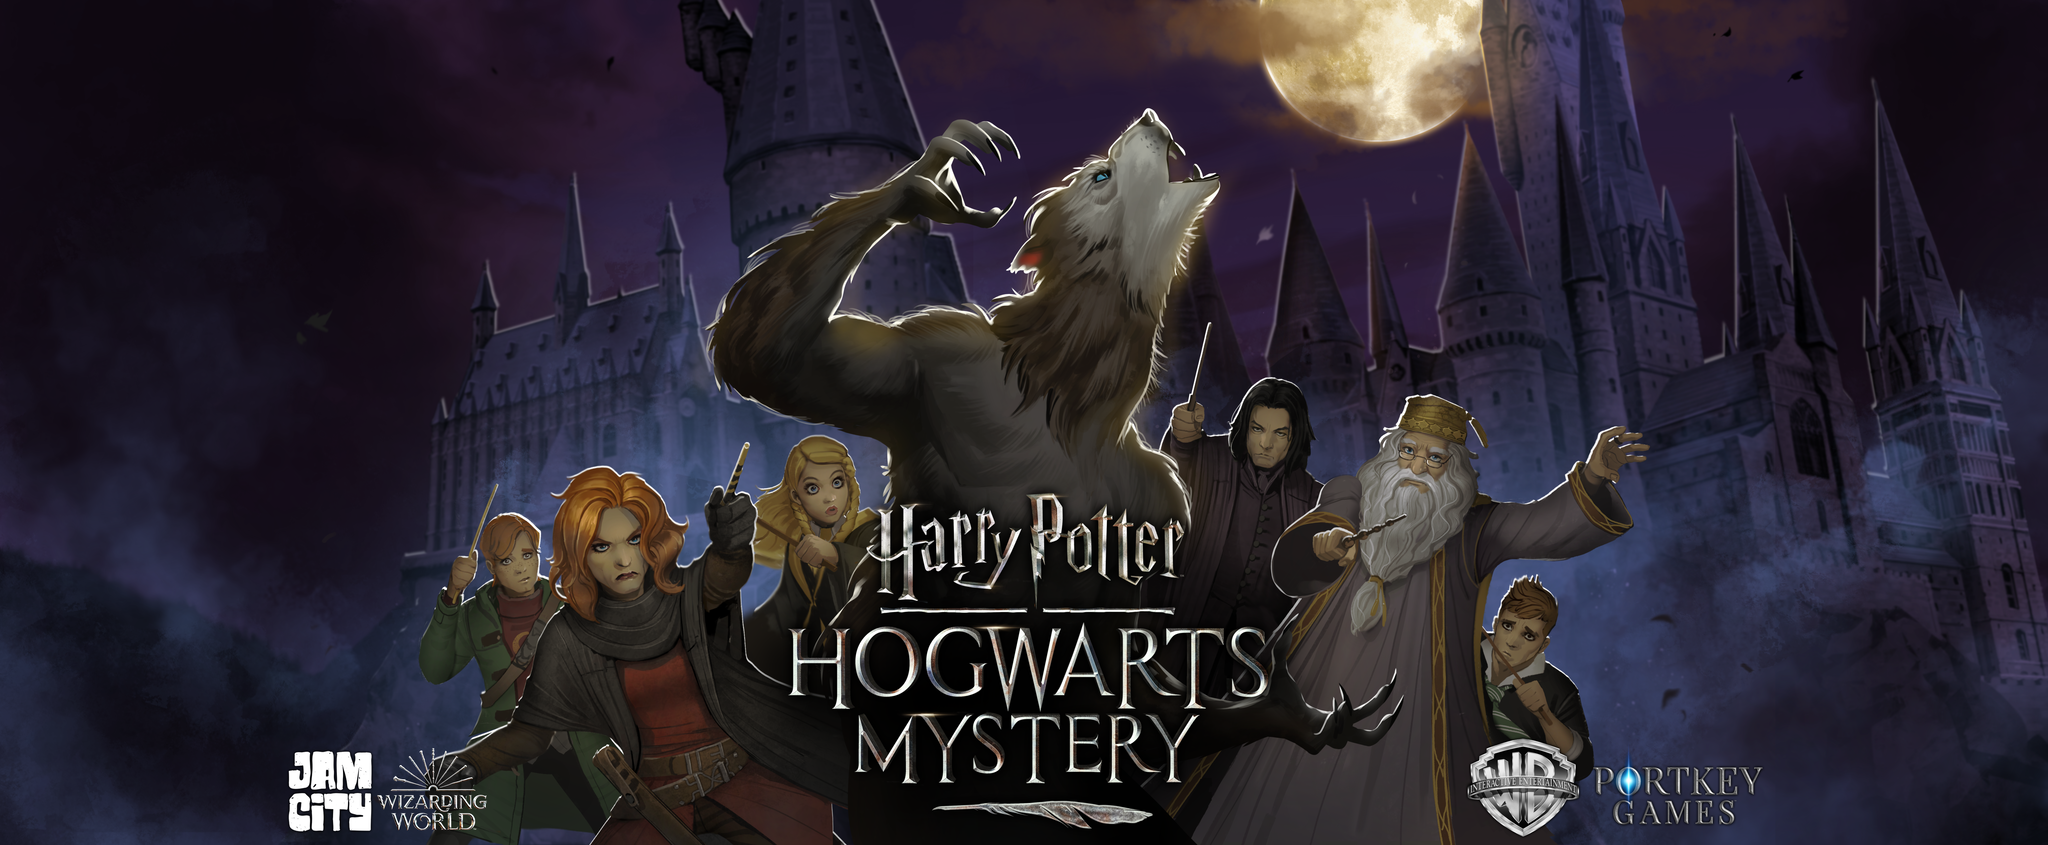 Harry Potter: Hogwarts Mystery' Halloween Event Will Take a Sinister Turn,  Say Devs